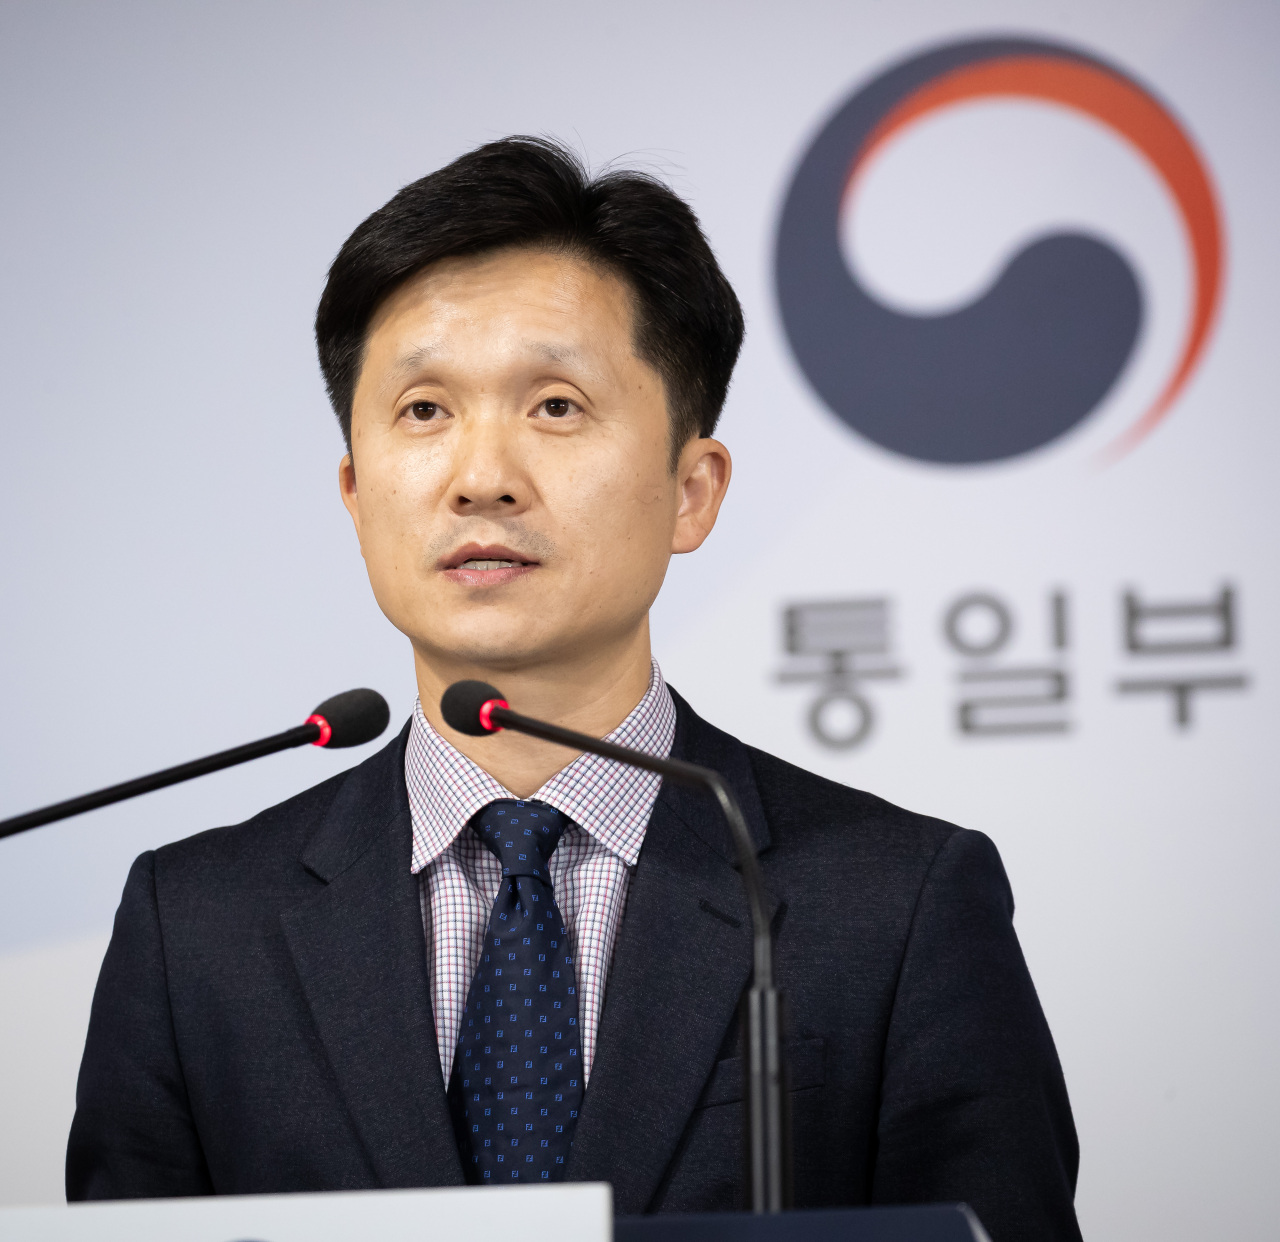 Unification Ministry spokesperson Lee Sang-min holds a press briefing on the deportation of North Korean fishermen at the Seoul Government Complex on Nov. 7, 2019. (Yonhap)